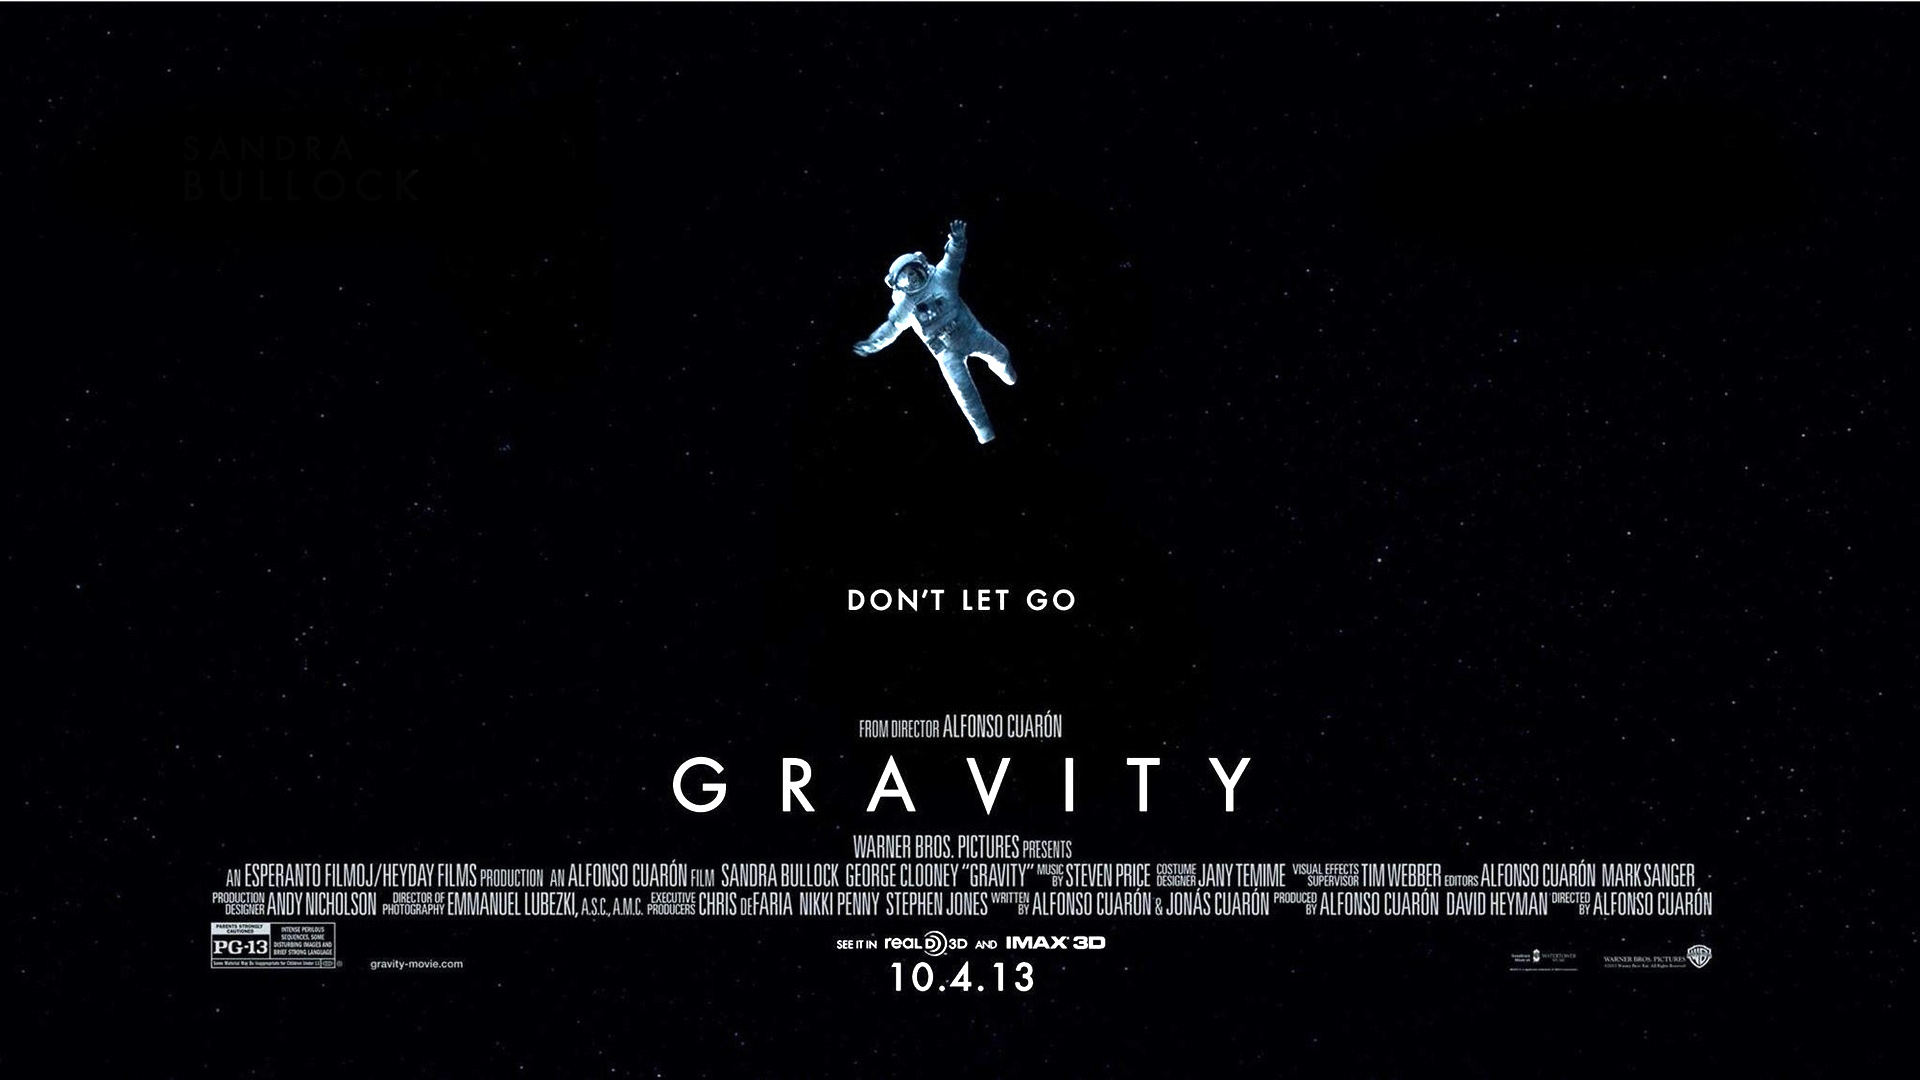 Wallpaper 4of 4 | Gravity Movie | Gravity Movie Wallpapers | Gravity Movie images